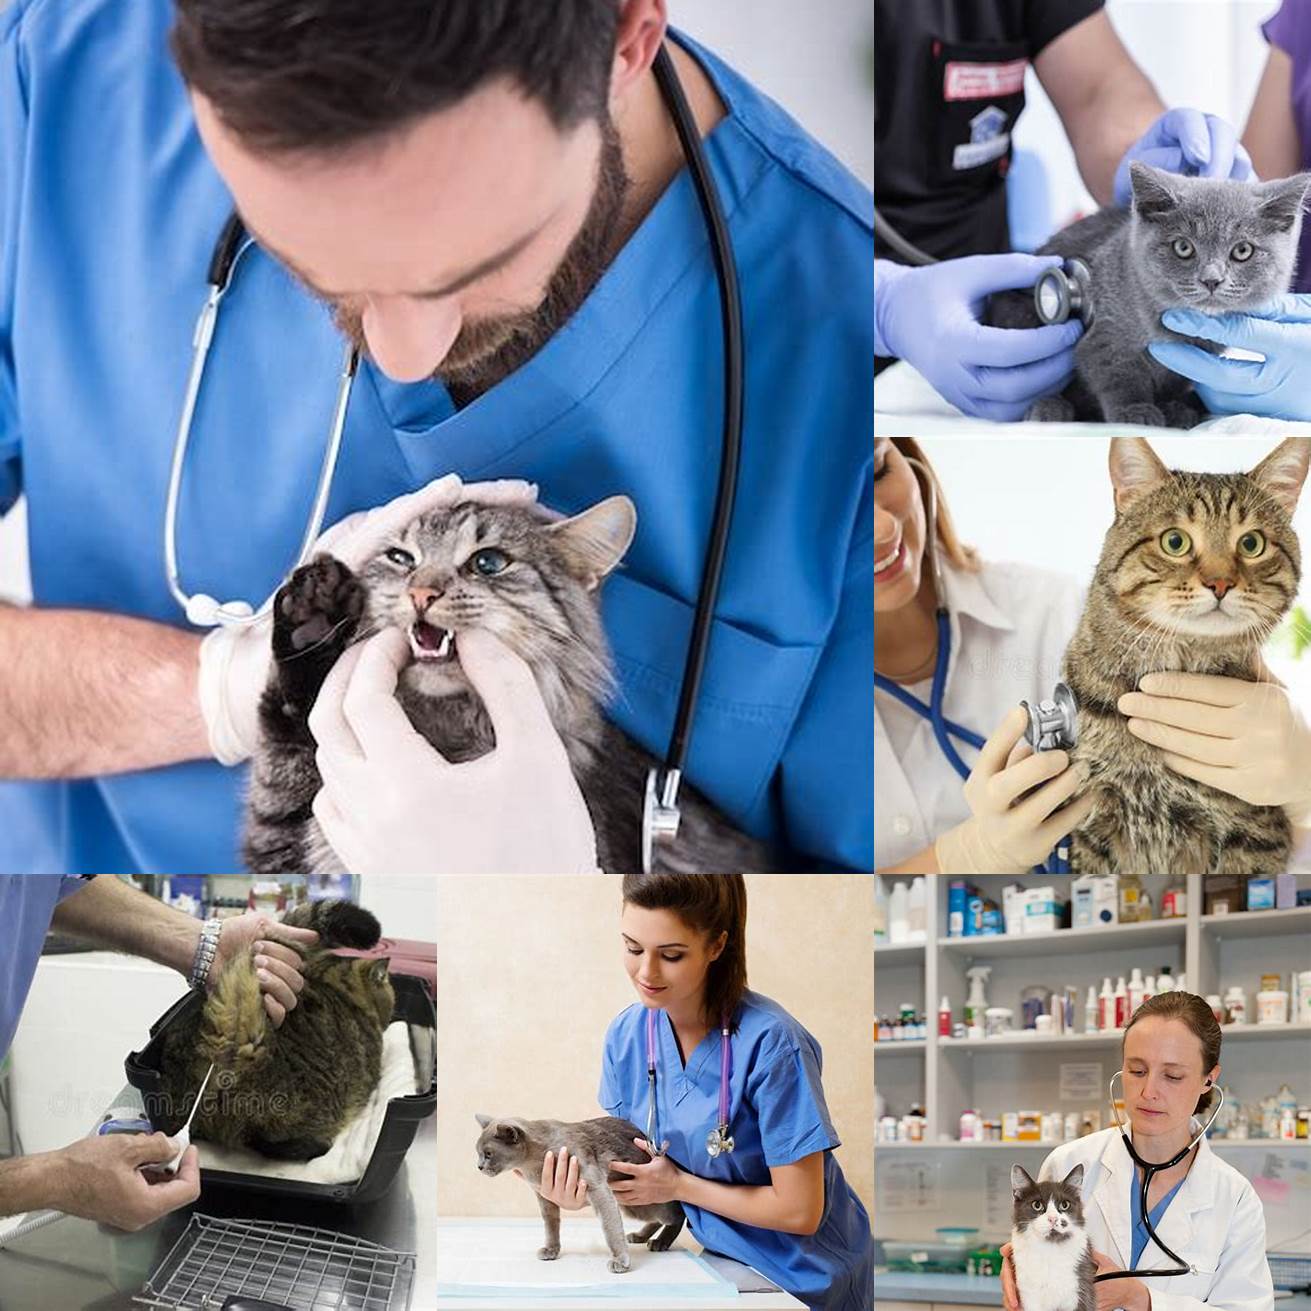 Veterinarian Examining CatBefore prescribing buprenorphine your veterinarian will perform a thorough examination of your cat to determine the appropriate dosage and treatment plan